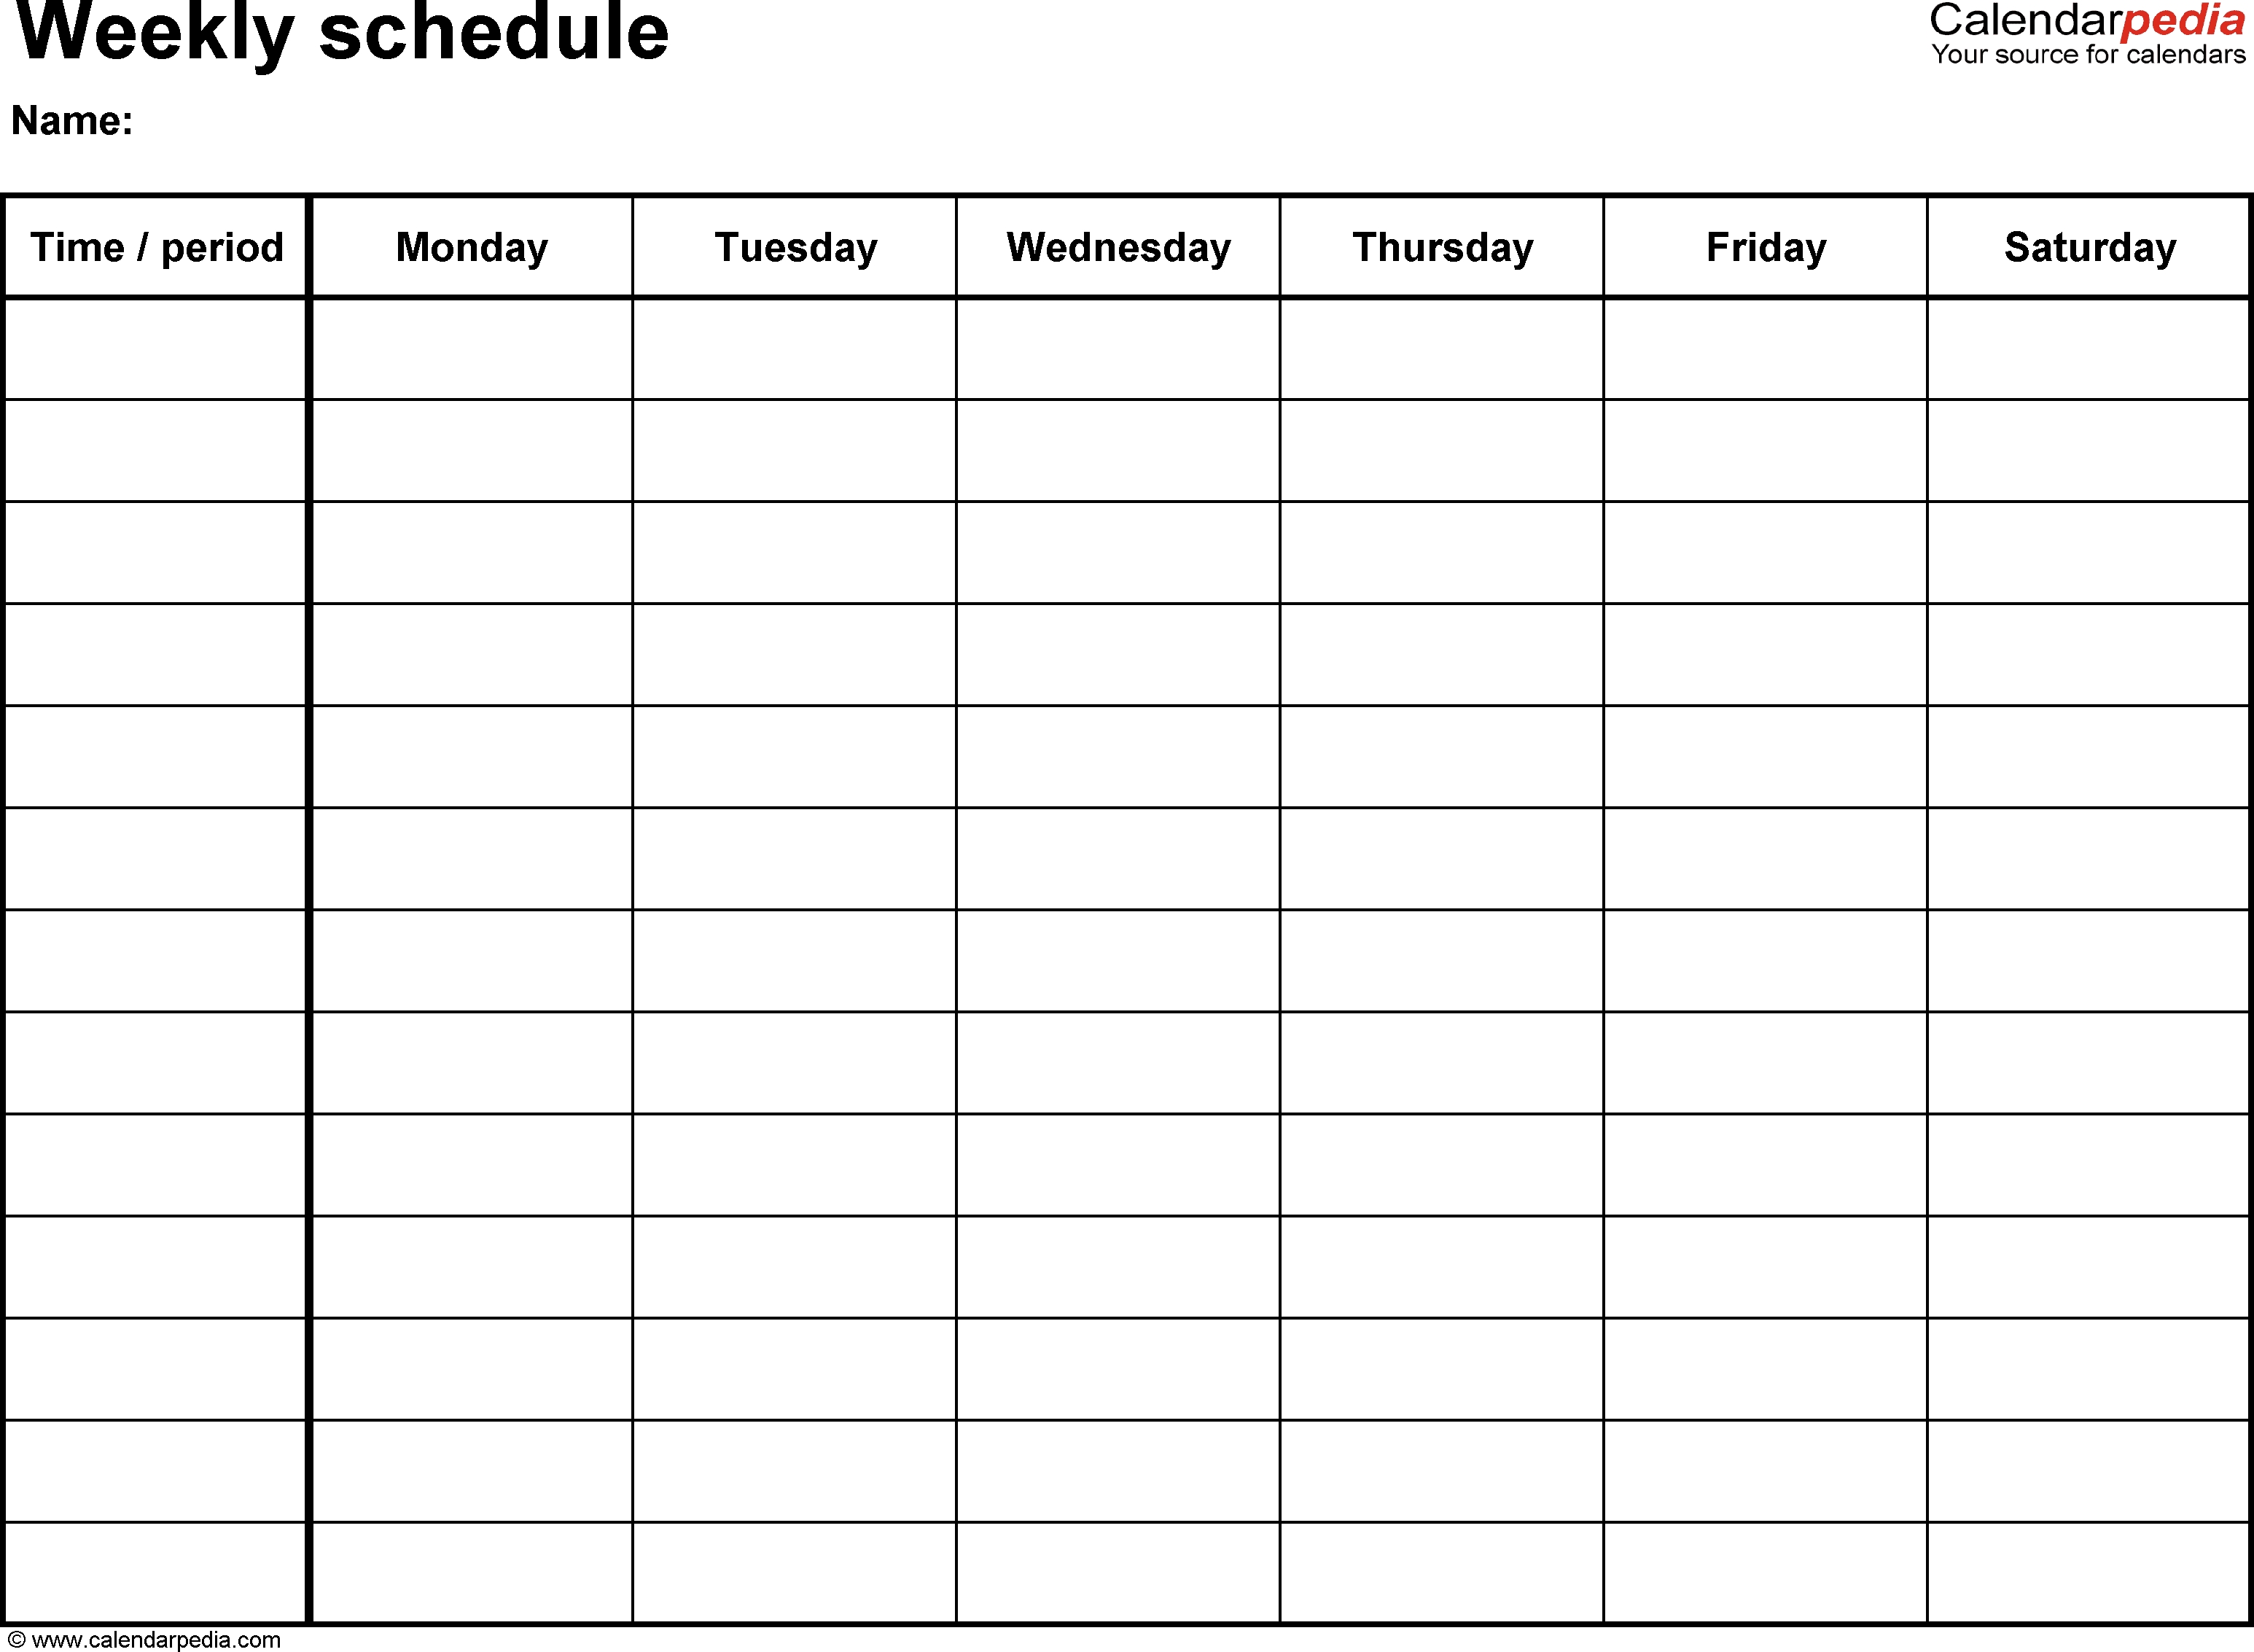 Free Weekly Schedule Templates For Word - 18 Templates-Free Blank Printable Calendar Template Weekly